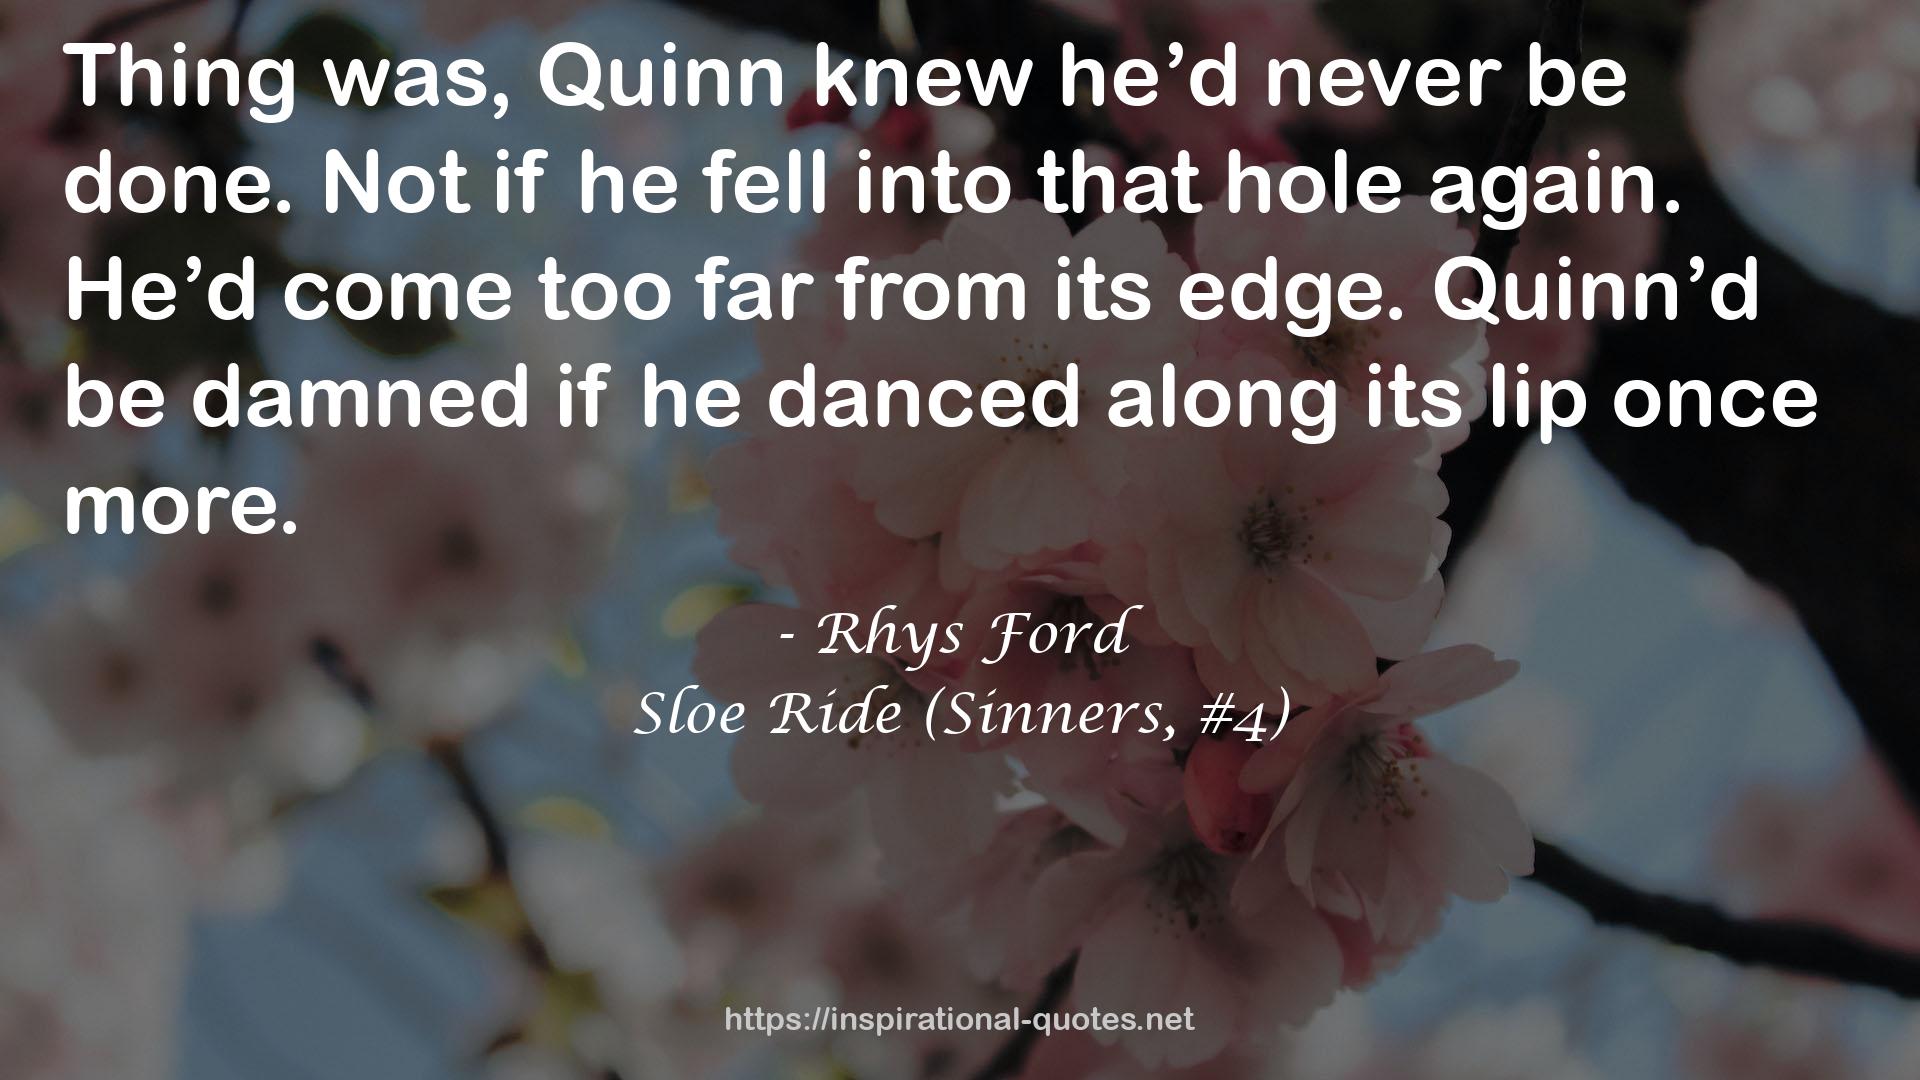 Sloe Ride (Sinners, #4) QUOTES